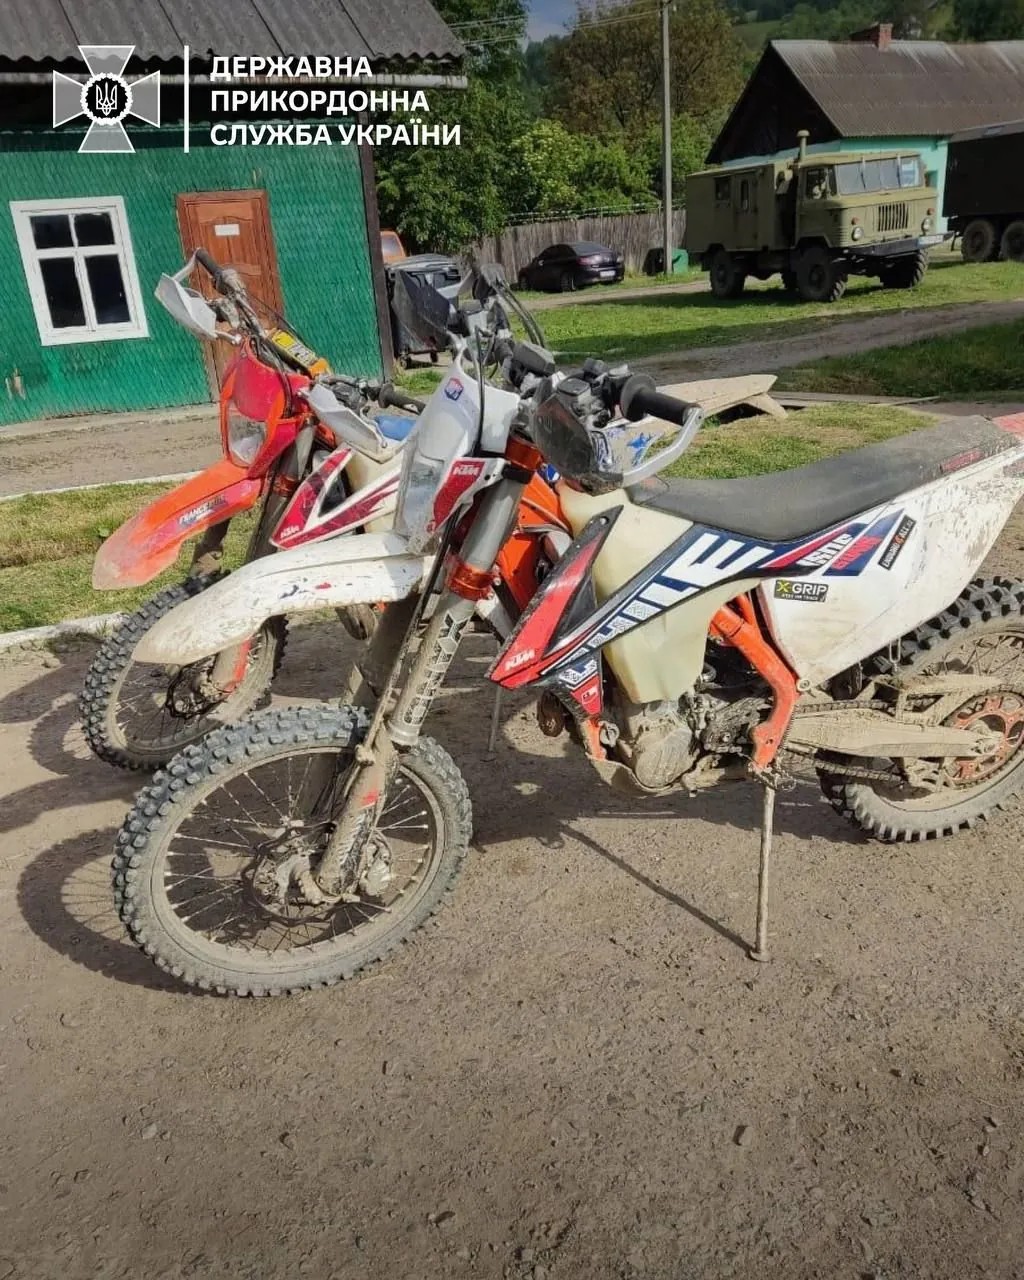 czech-bikers-illegally-crossed-the-ukrainian-border-how-and-why